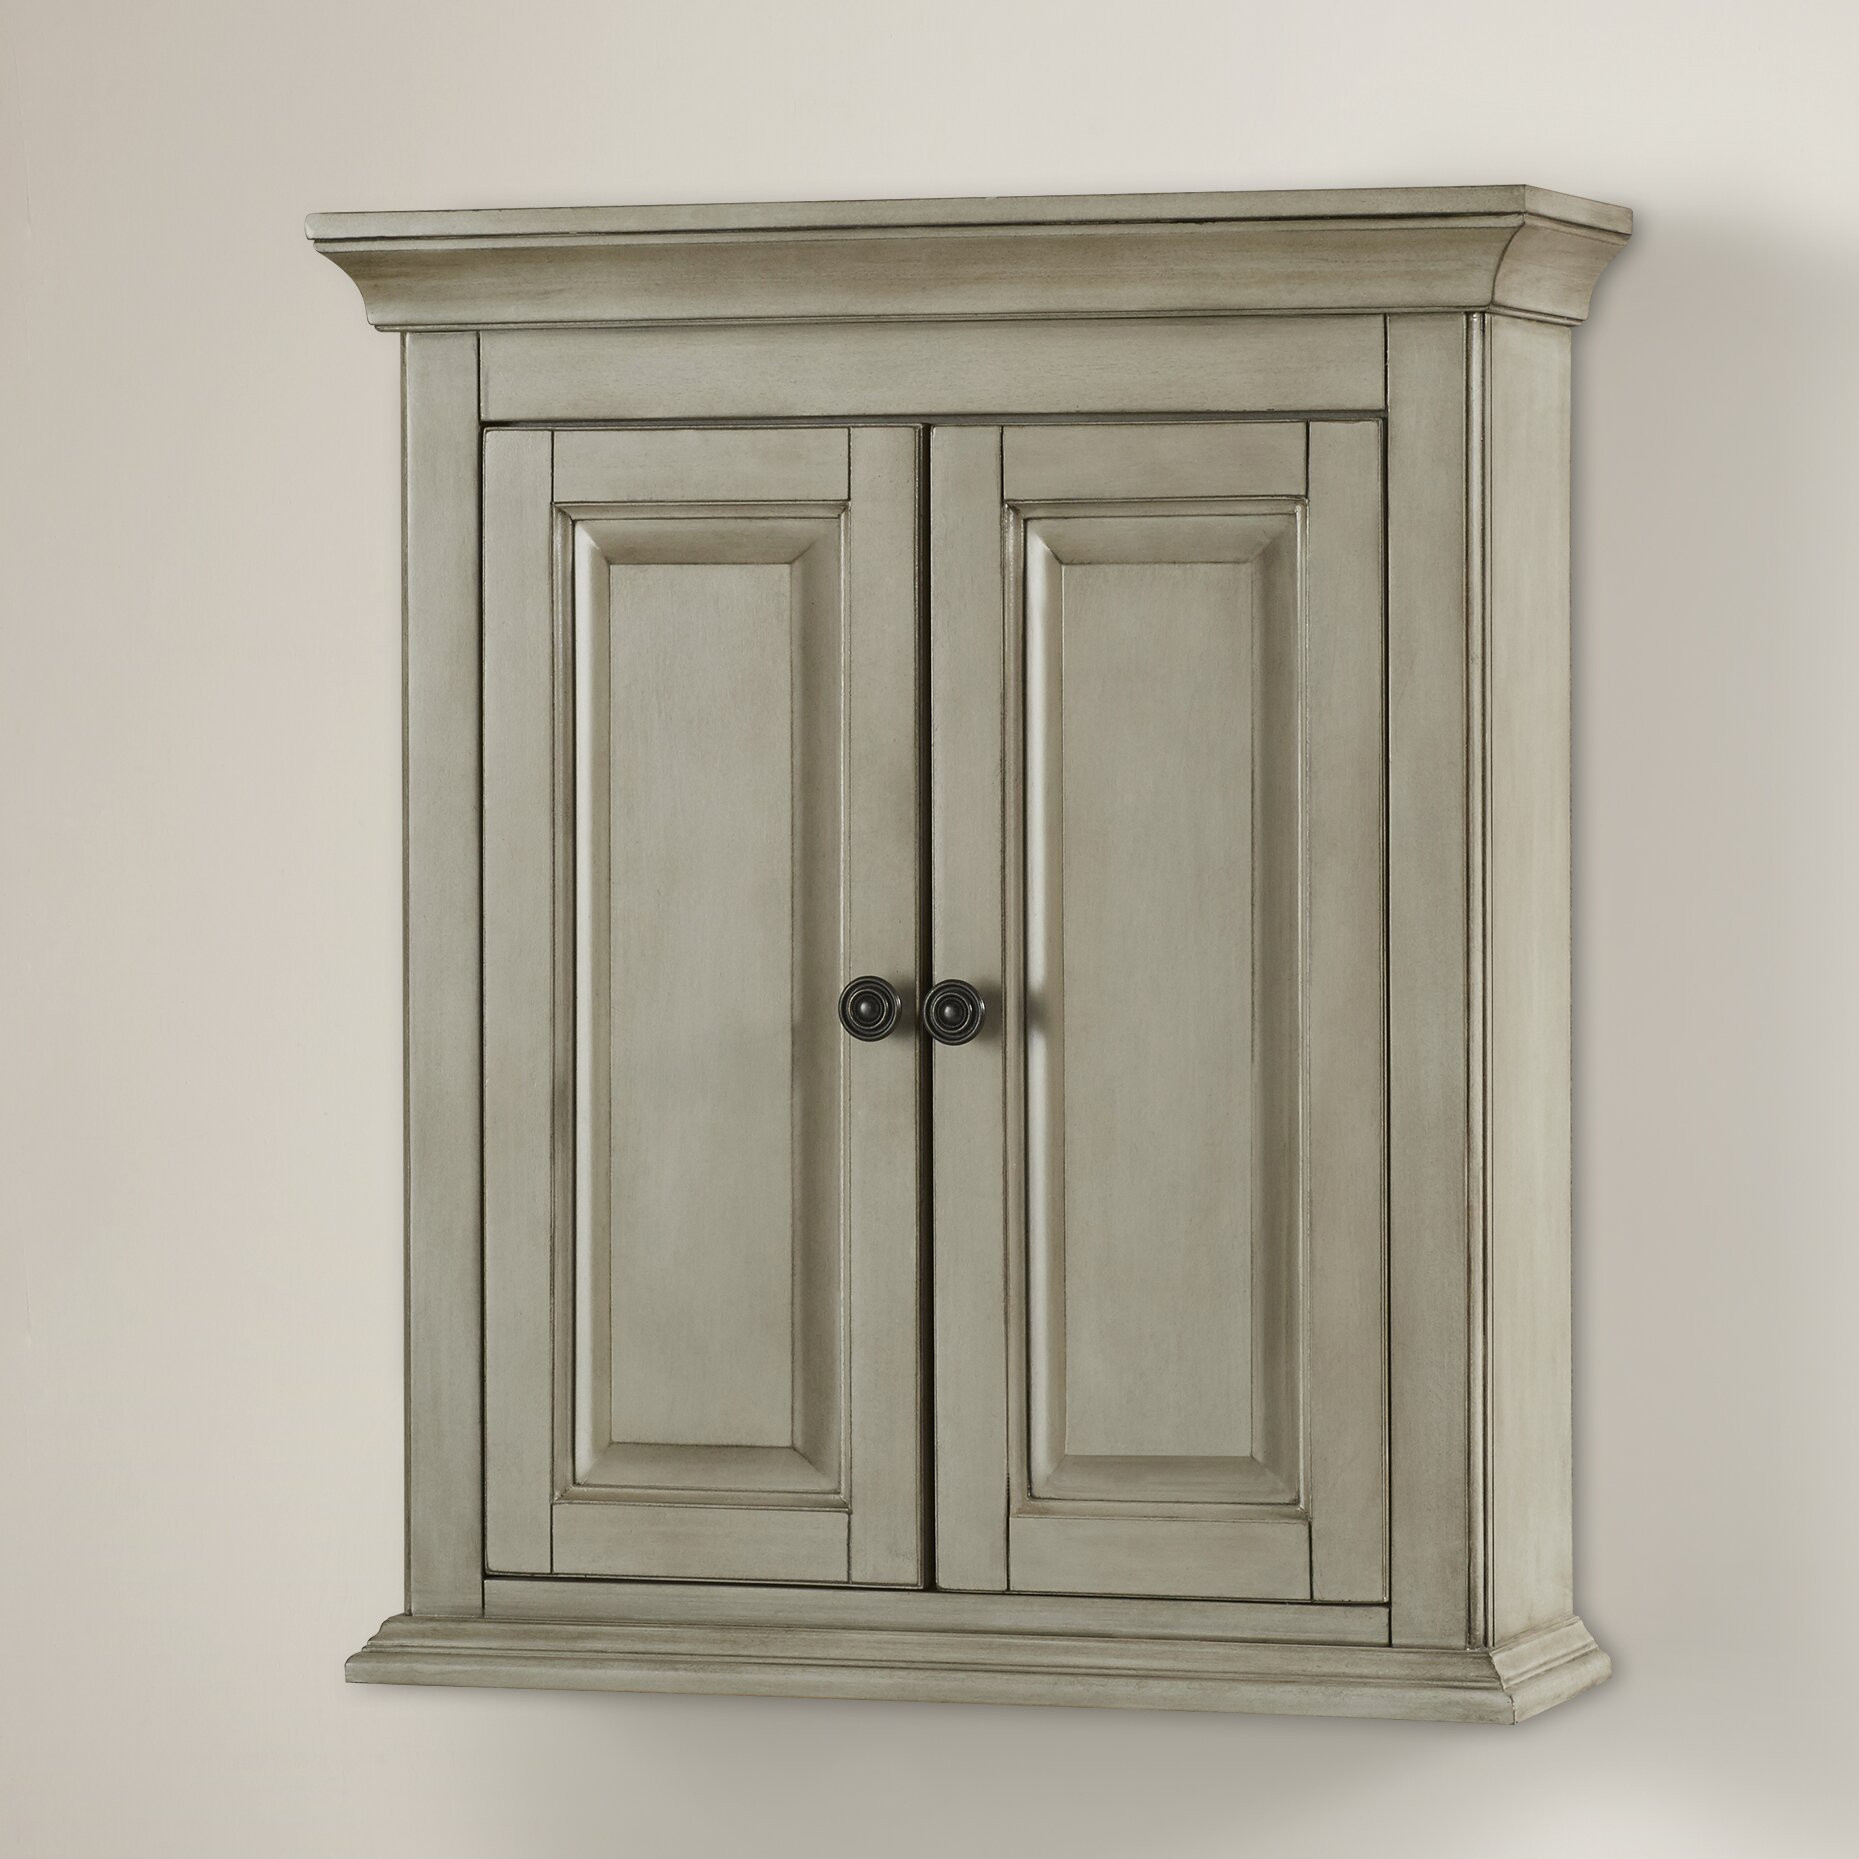 Wall Mount Bathroom Cabinet
 Hazelwood Home Palmo 24" W x 28" H Wall Mounted Cabinet